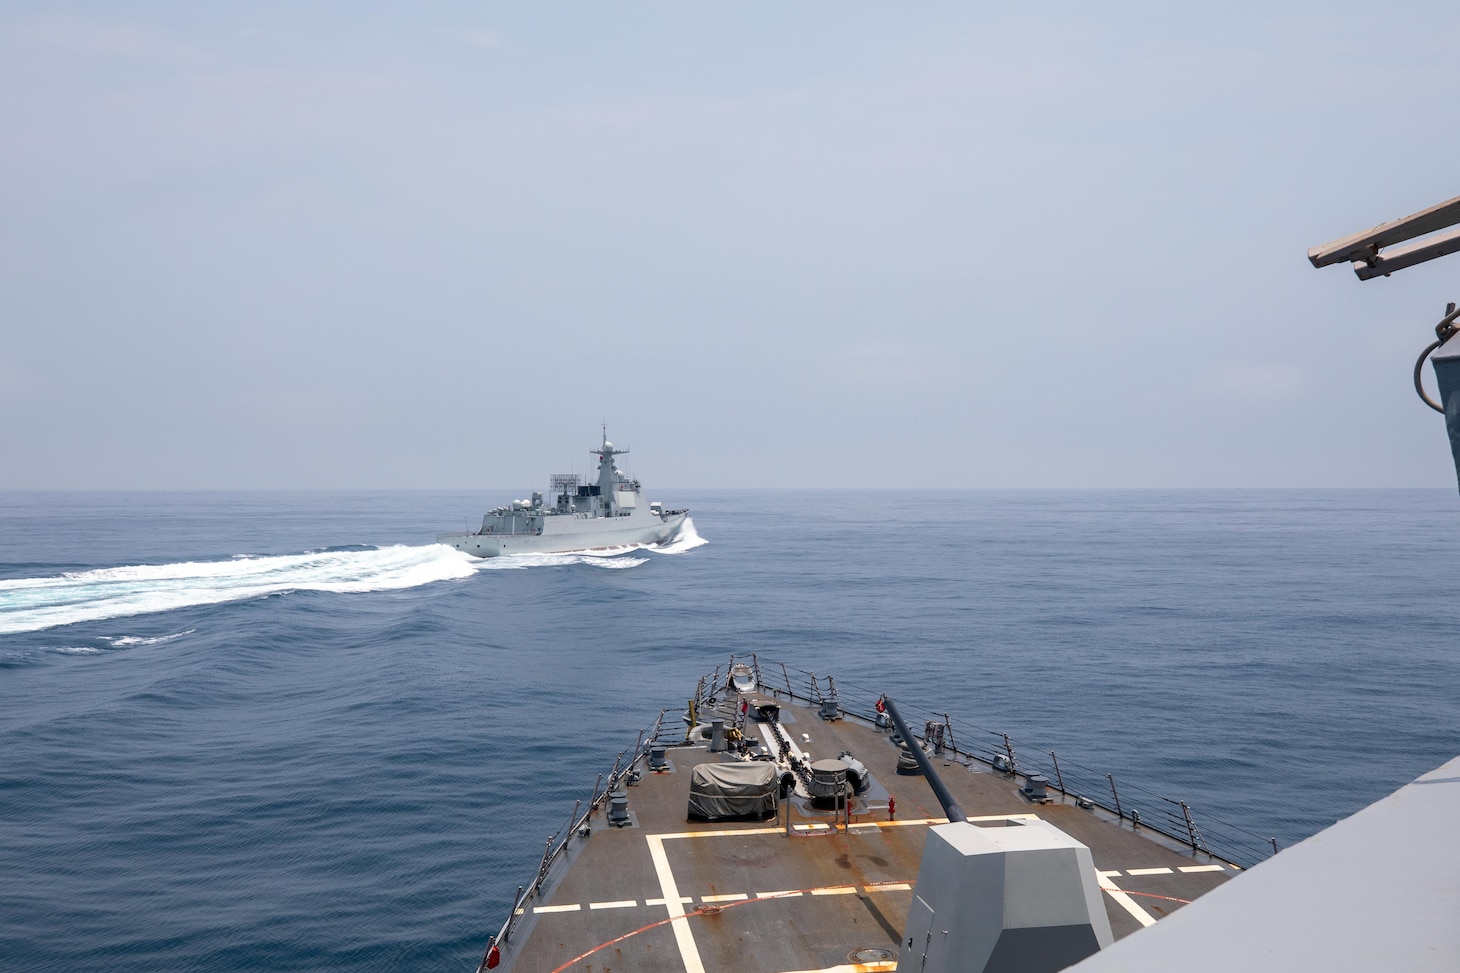 TAIWAN STRAIT (June 3, 2023) The Arleigh Burke-class guided-missile destroyer USS Chung-Hoon (DDG 93) observes PLA(N) LUYANG III DDG 132 (PRC LY 132) execute maneuvers in an unsafe manner while conducting a routine south to north Taiwan Strait transit alongside the Halifax-class frigate HMCS Montreal (FFG 336), June 3. USS Chung-Hoon is on a routine deployment to U.S. 7th Fleet and is assigned to Commander, Task Force (CTF 71)/ Destroyer Squadron (DESRON) 15. CTF 71/DESRON 15 is the largest forward-deployed DESRON and the U.S. 7th Fleet’s principal surface force. (U.S. Navy photo by Mass Communication Specialist 1st Class Andre T. Richard)